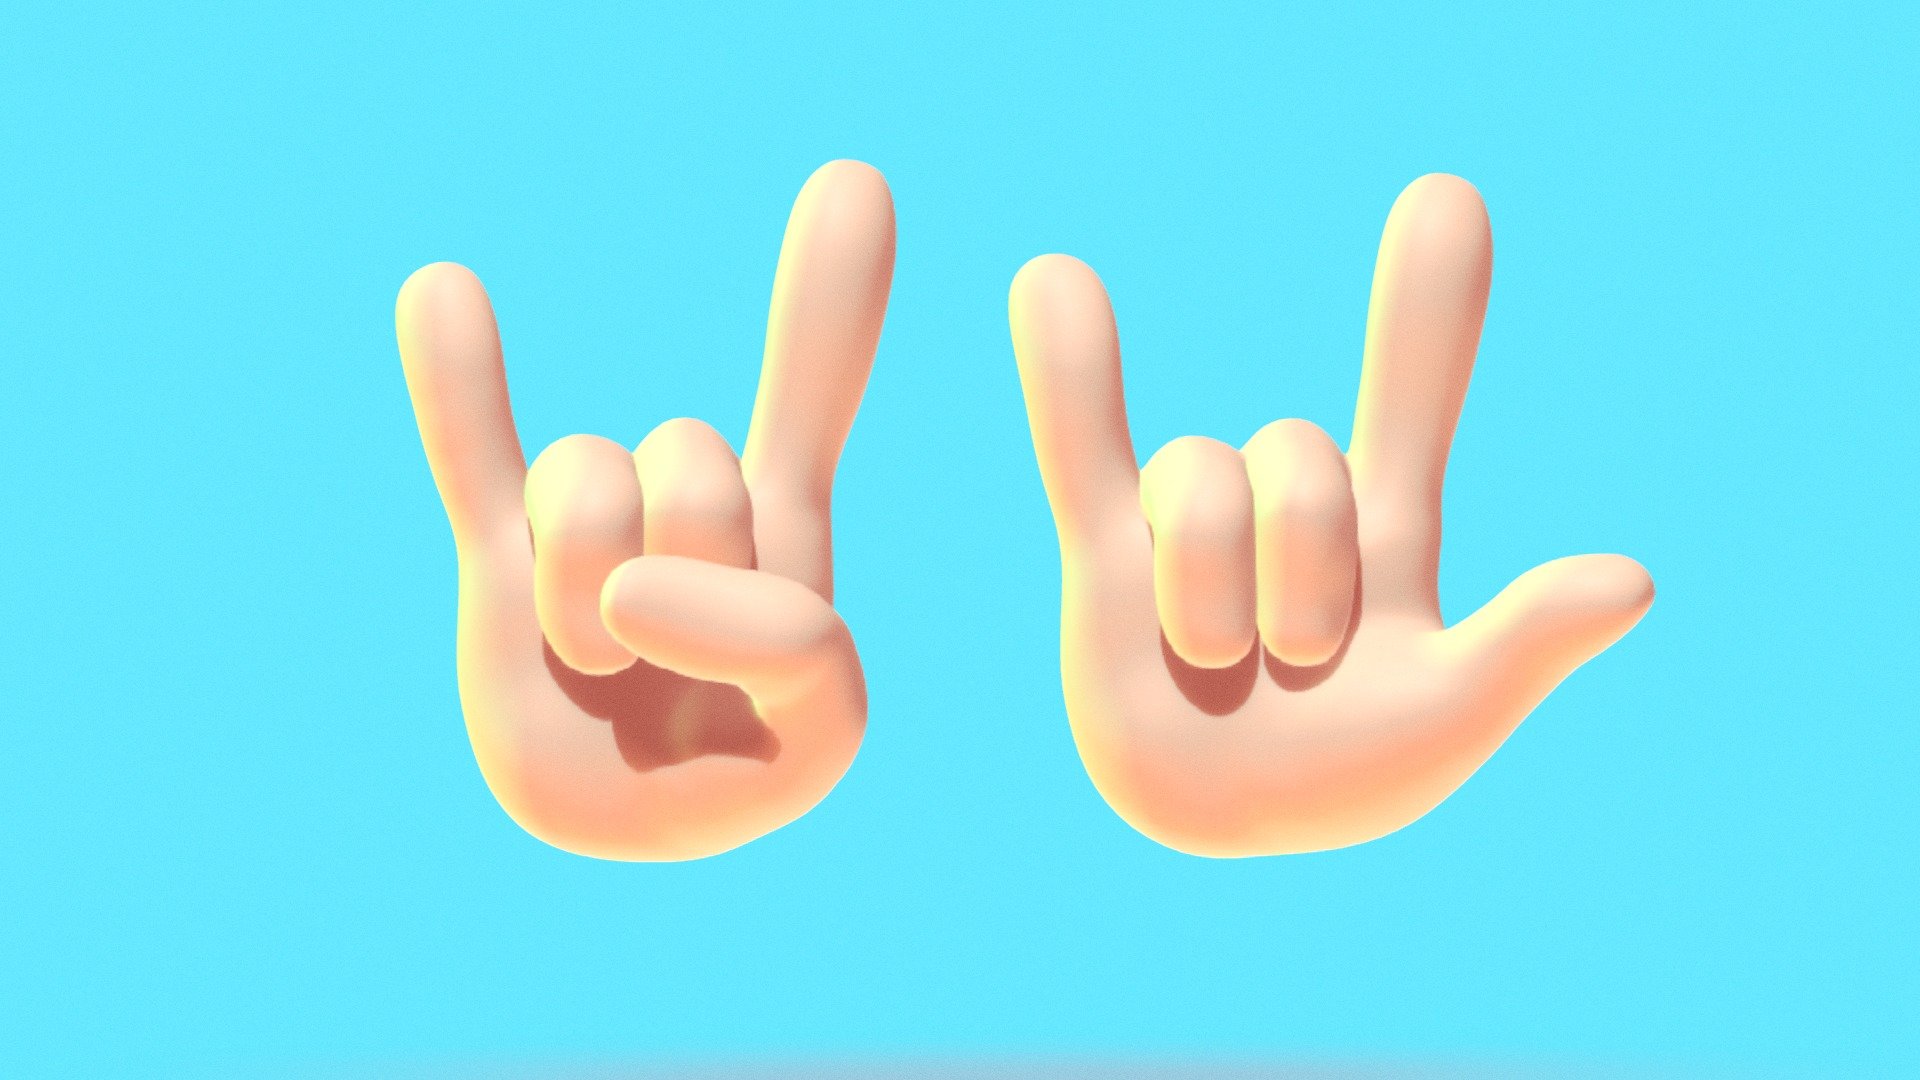 The emoji depicts a human hand with the index finger and pinky finger extended upwards, while the middle, ring, and thumb fingers are tucked into the palm. The hand is typically depicted facing forward or slightly angled to the side.

The primary meaning behind this gesture is to convey a sense of rock music, concerts, and the overall rock &lsquo;n' roll lifestyle. It is often used to represent excitement, enthusiasm, and a love for rock and heavy metal music.

The sign of the horns emoji is also associated with a gesture used to ward off evil or to protect against bad luck, depending on cultural contexts. In this sense, it can symbolize strength, power, and protection.

Overall, the sign of the horns emoji is a versatile symbol that can be used to express various emotions related to music, celebration, and personal beliefs 3d model